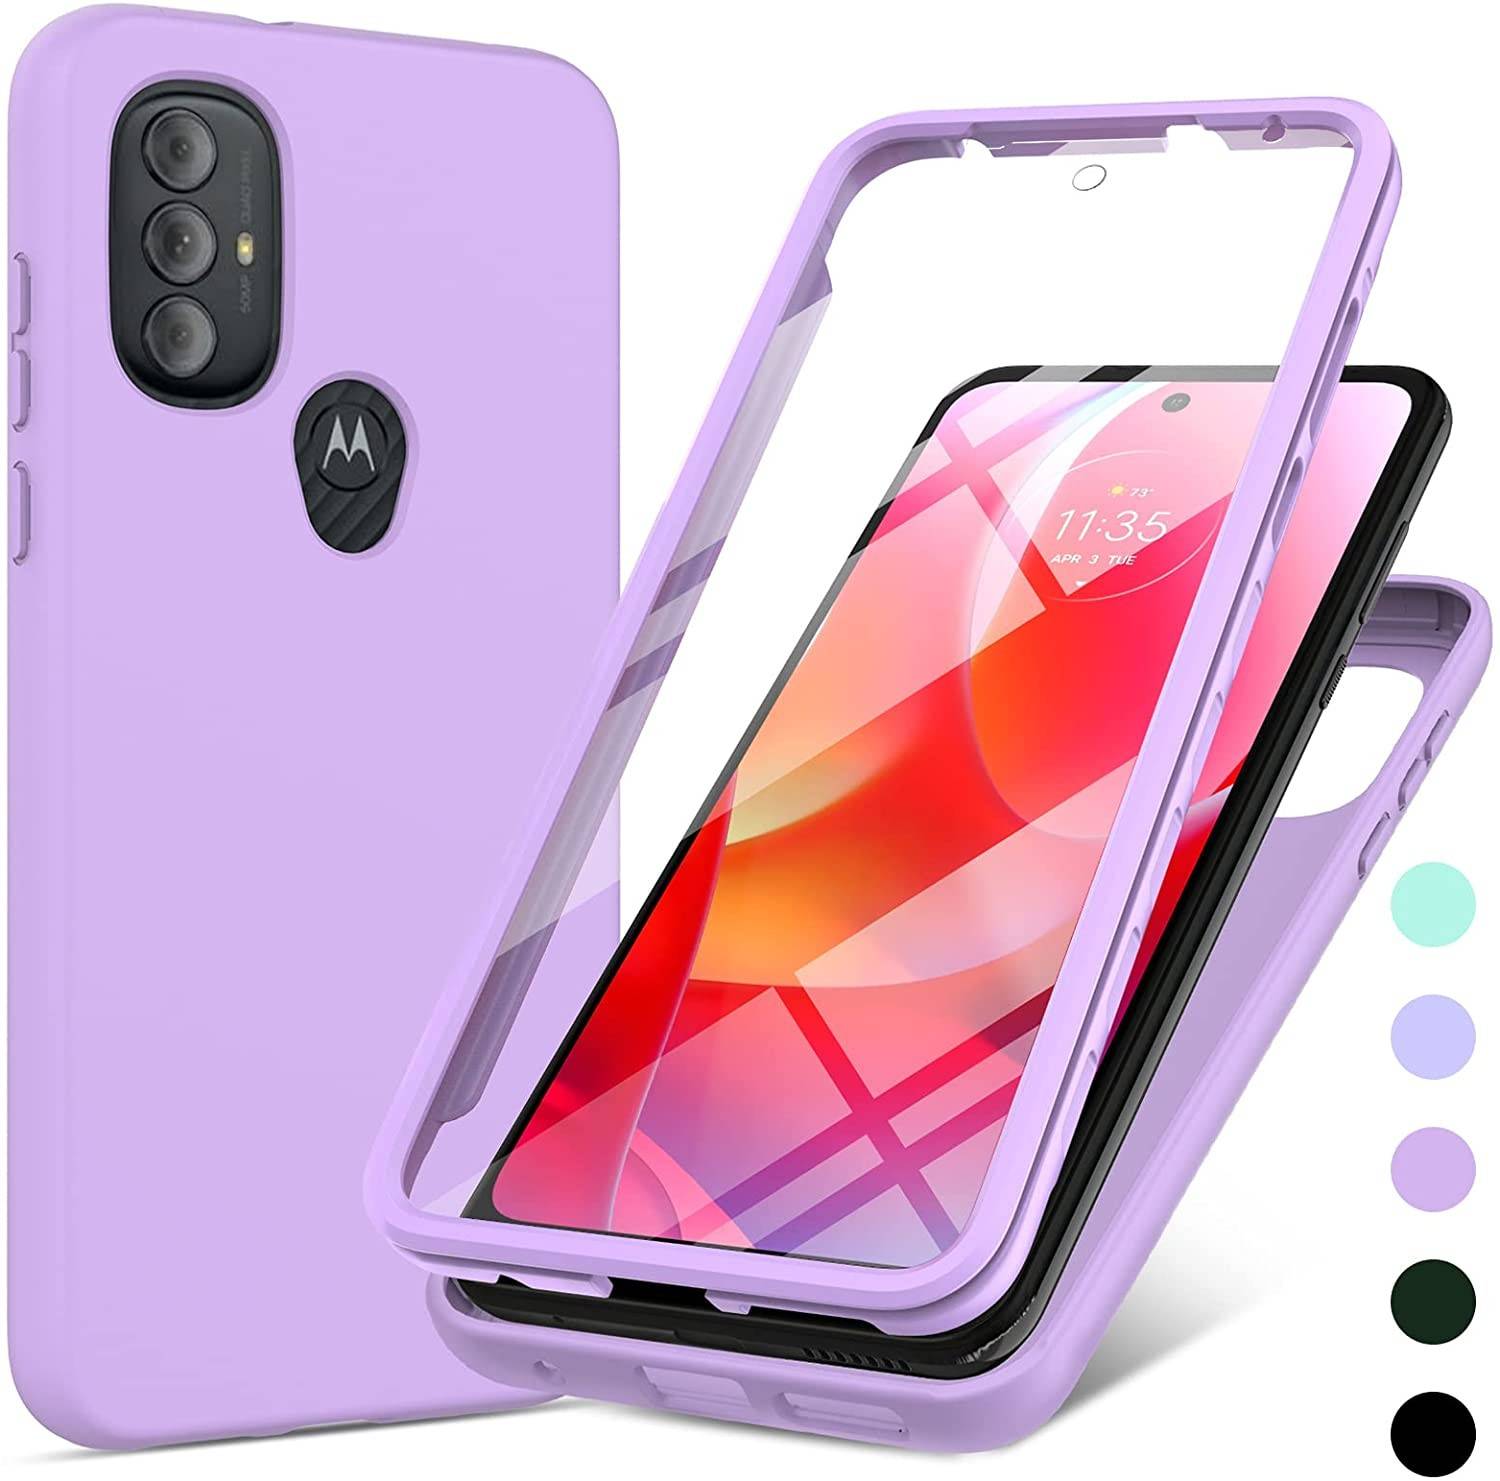 UNIPEY Silicone Case for Moto G Power 2022